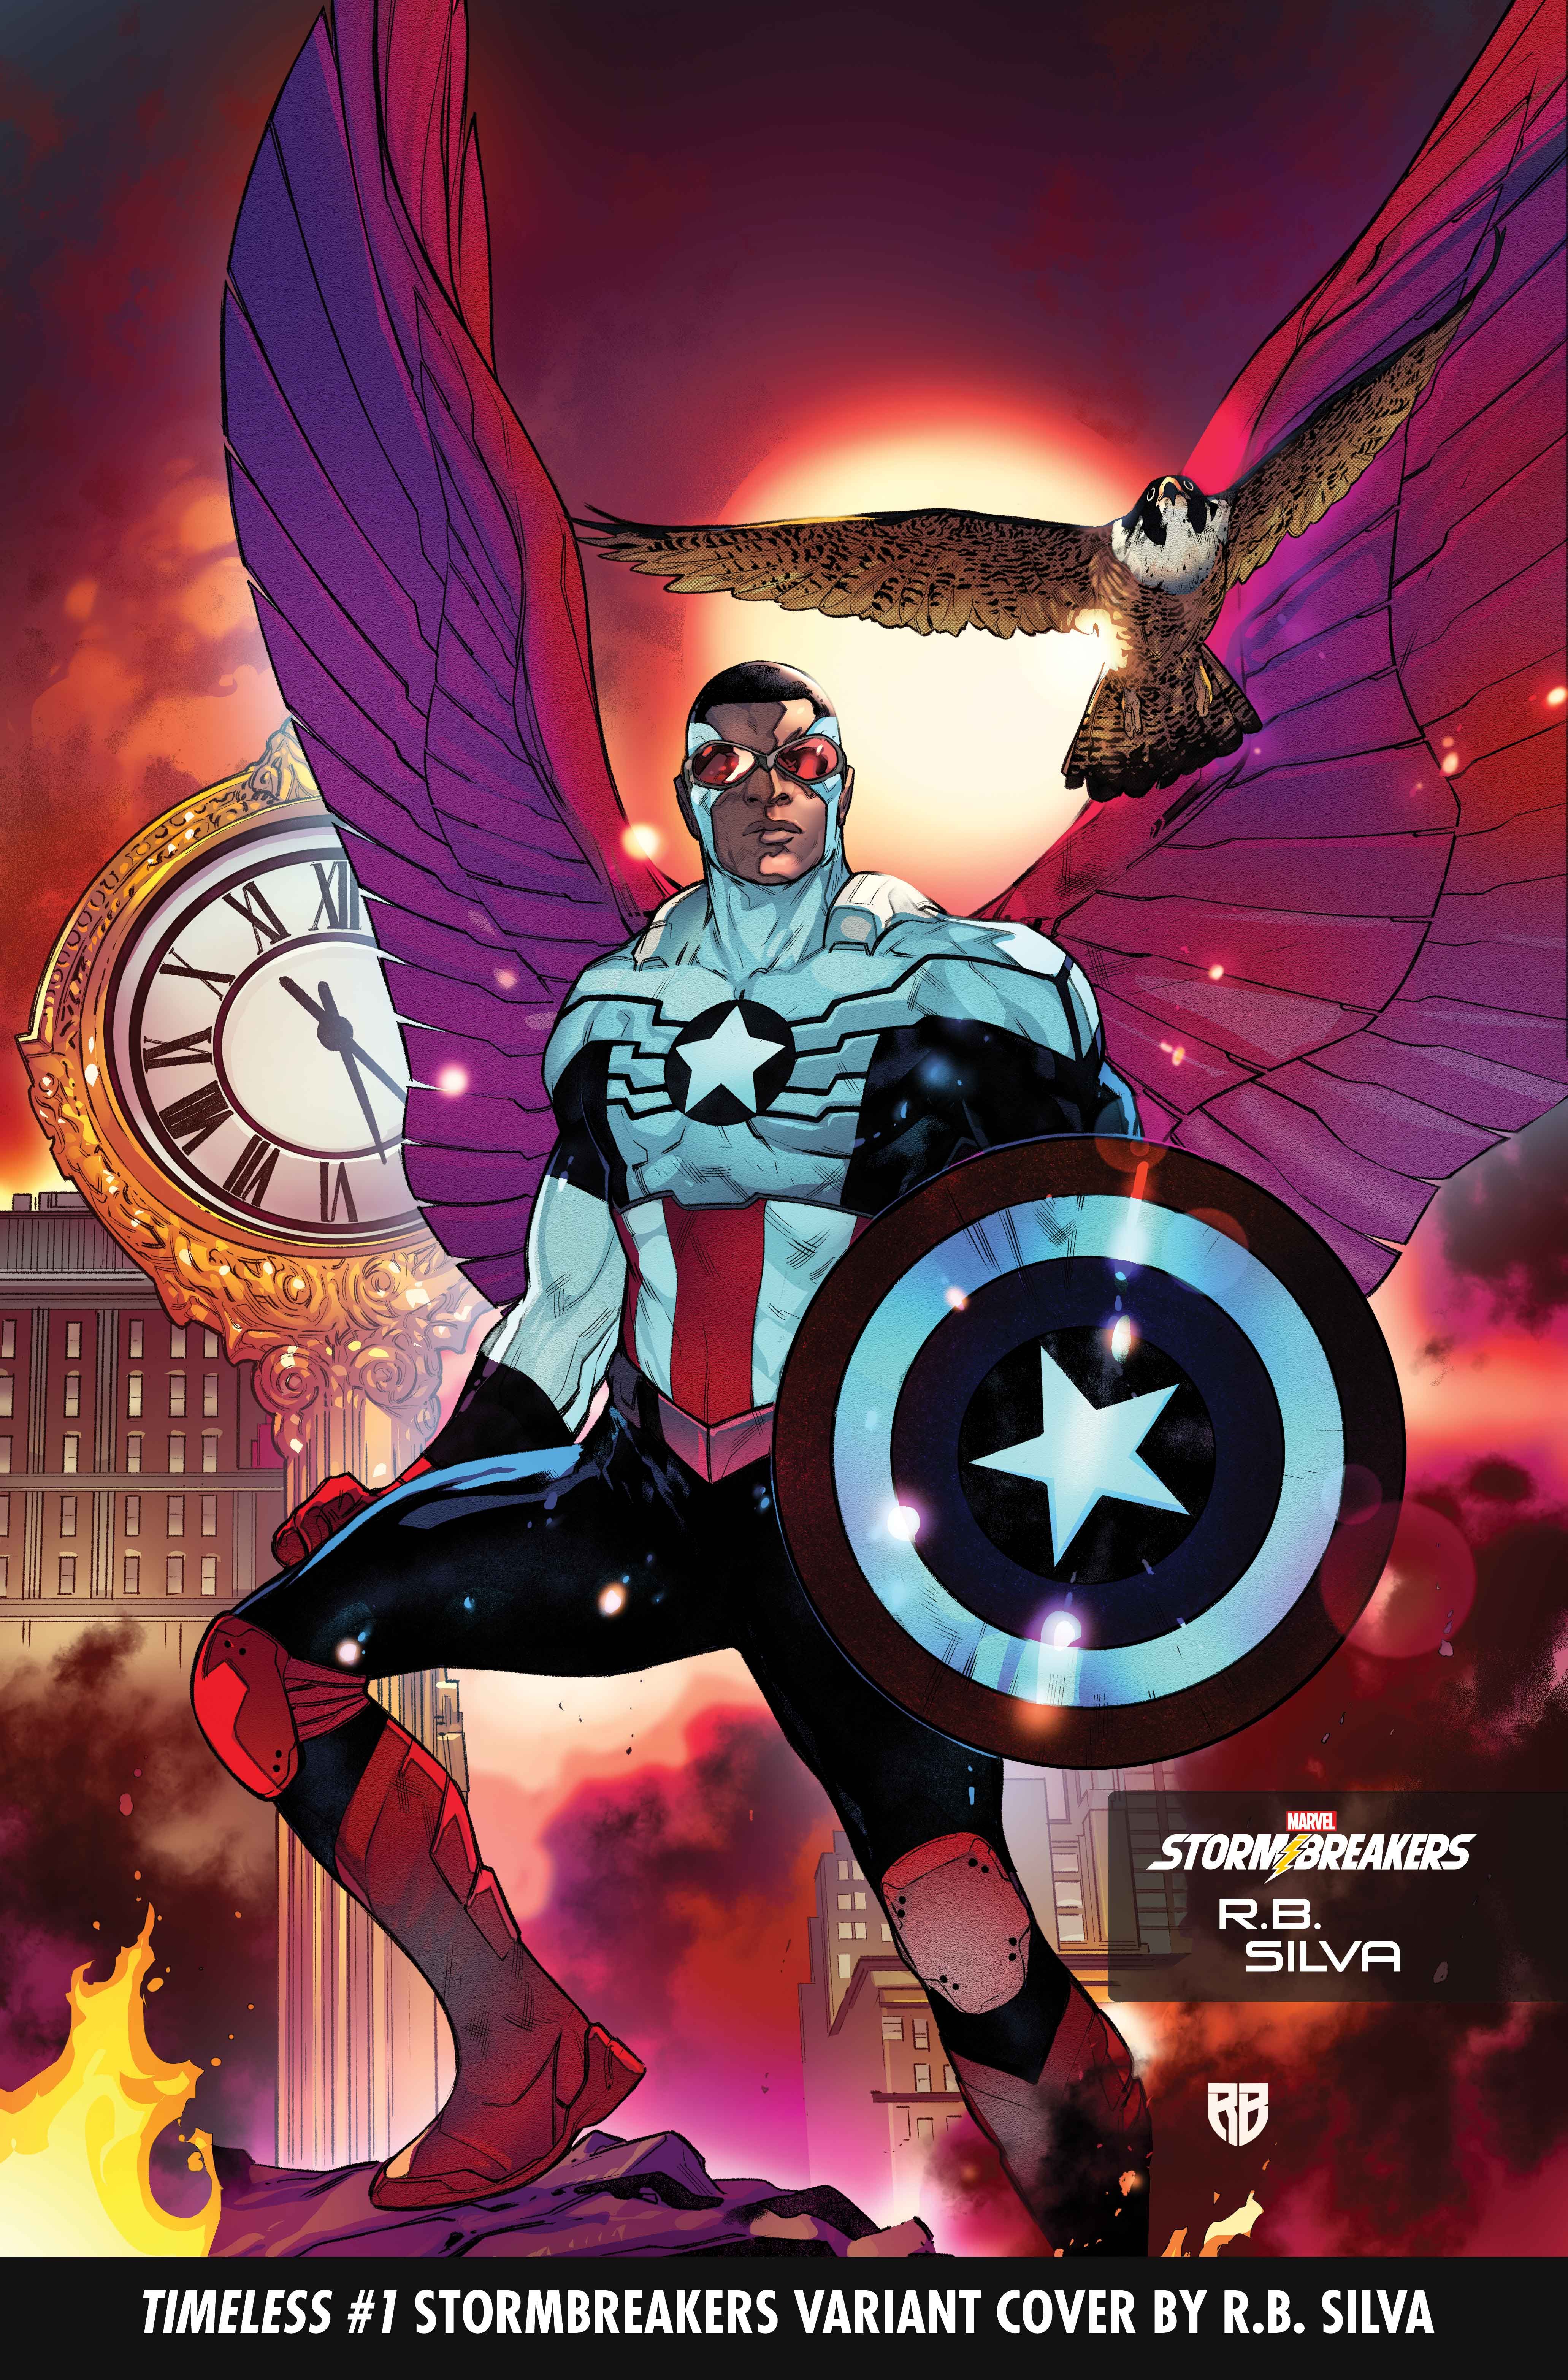 Sam Wilson as Captain America on the cover of Timeless 1 Stormbreakers variant by RB Silva